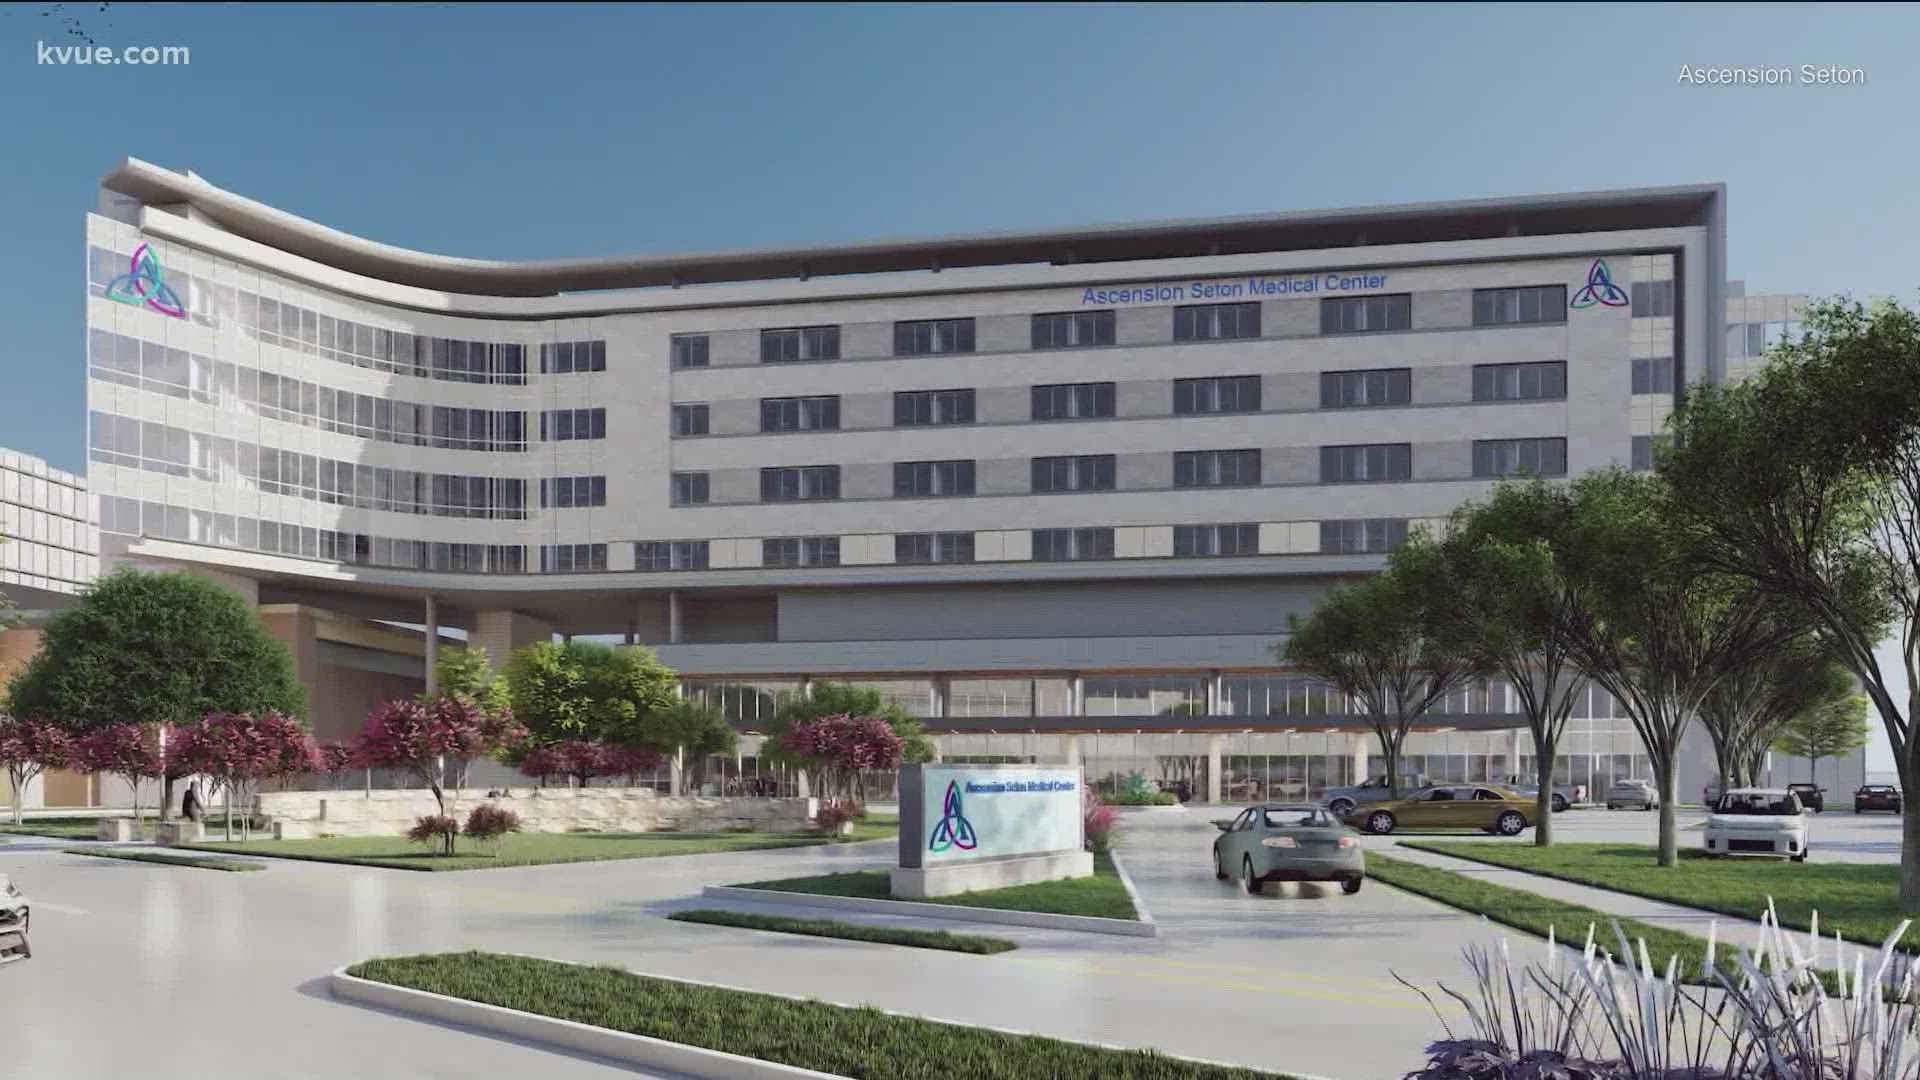 Ascension Seton is investing $320 million to expand its Austin campus to offer comprehensive women's health services.